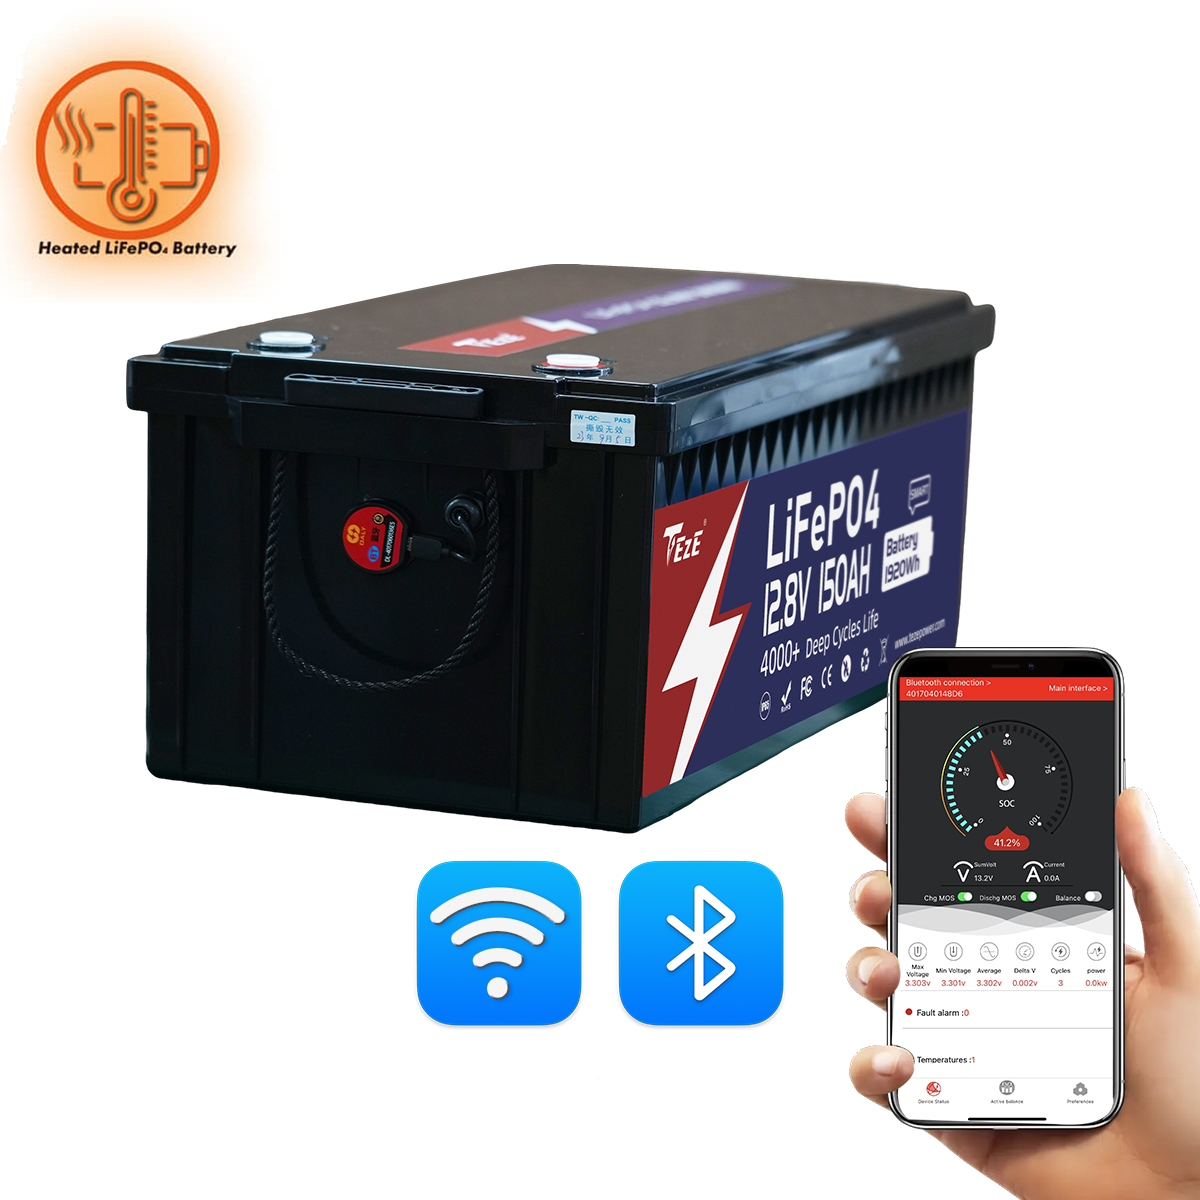 New Add WiFi-TezePower 12V 150Ah LiFePO4 Battery with WIFI and Bluetooth, Self-heating and Active Balancer, Built-in 150A Daly BMS(WIFI External Version)